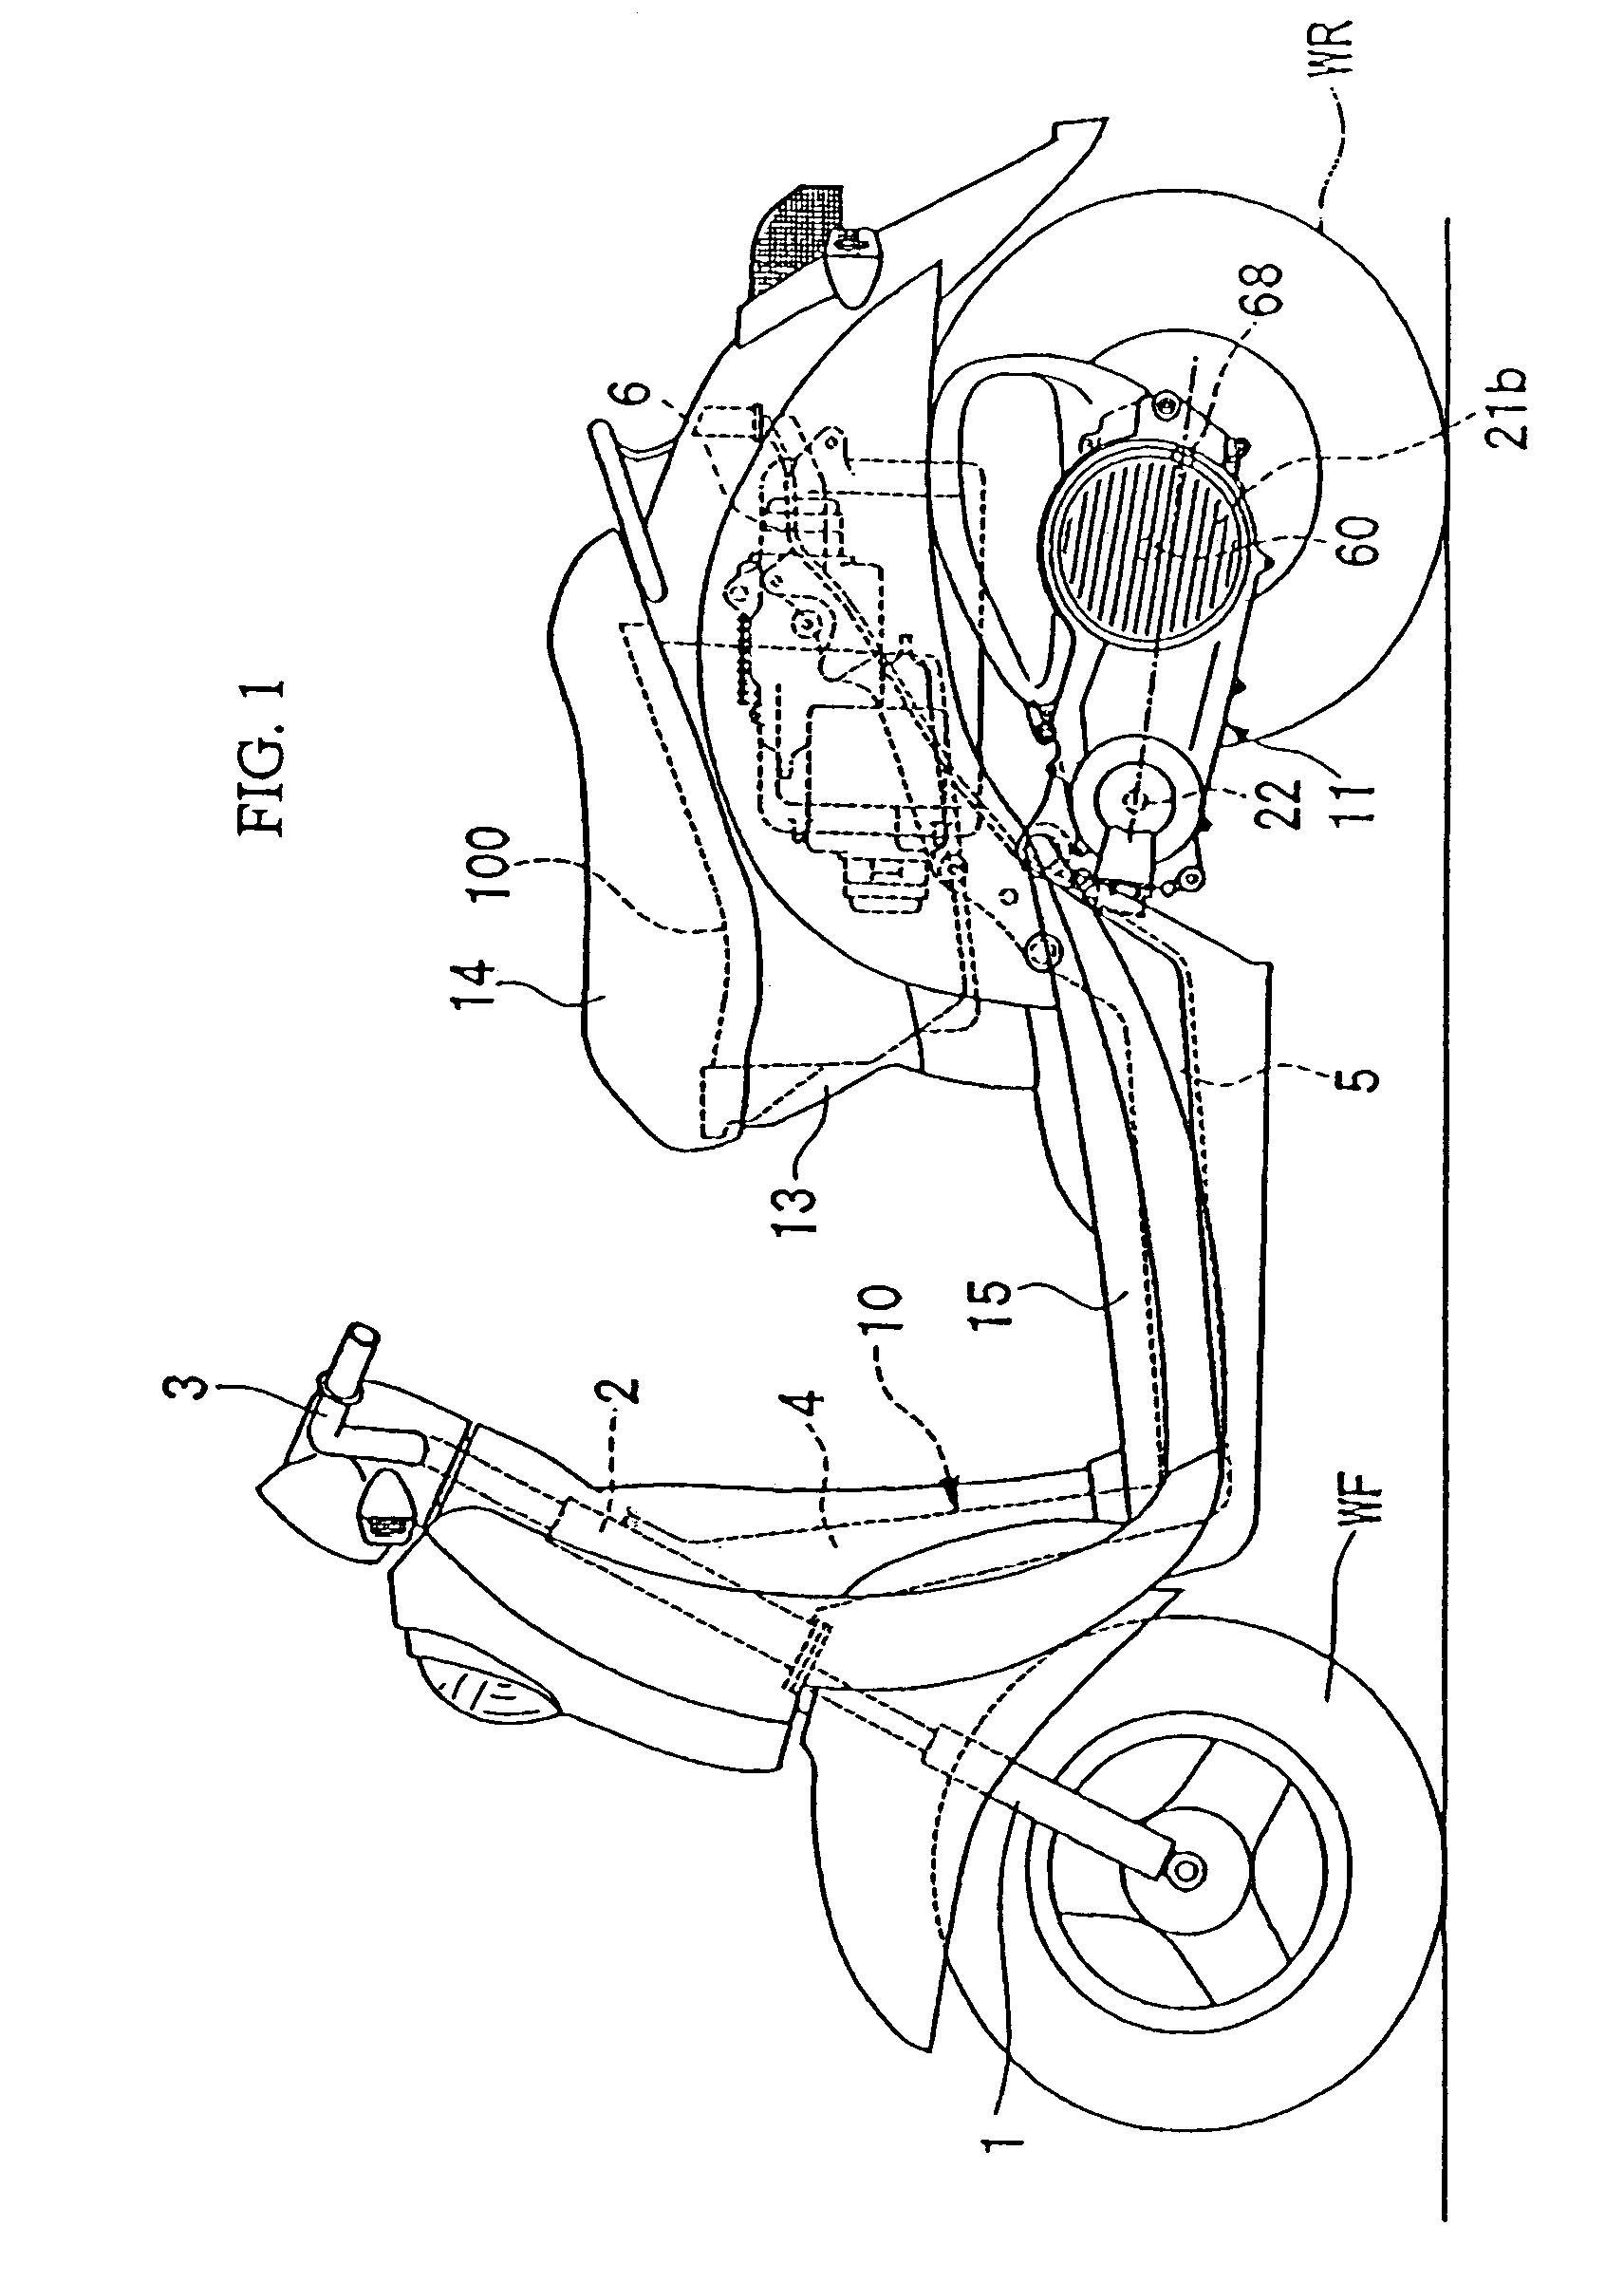 Electric generator control method and apparatus, and vehicle equipped with such apparatus